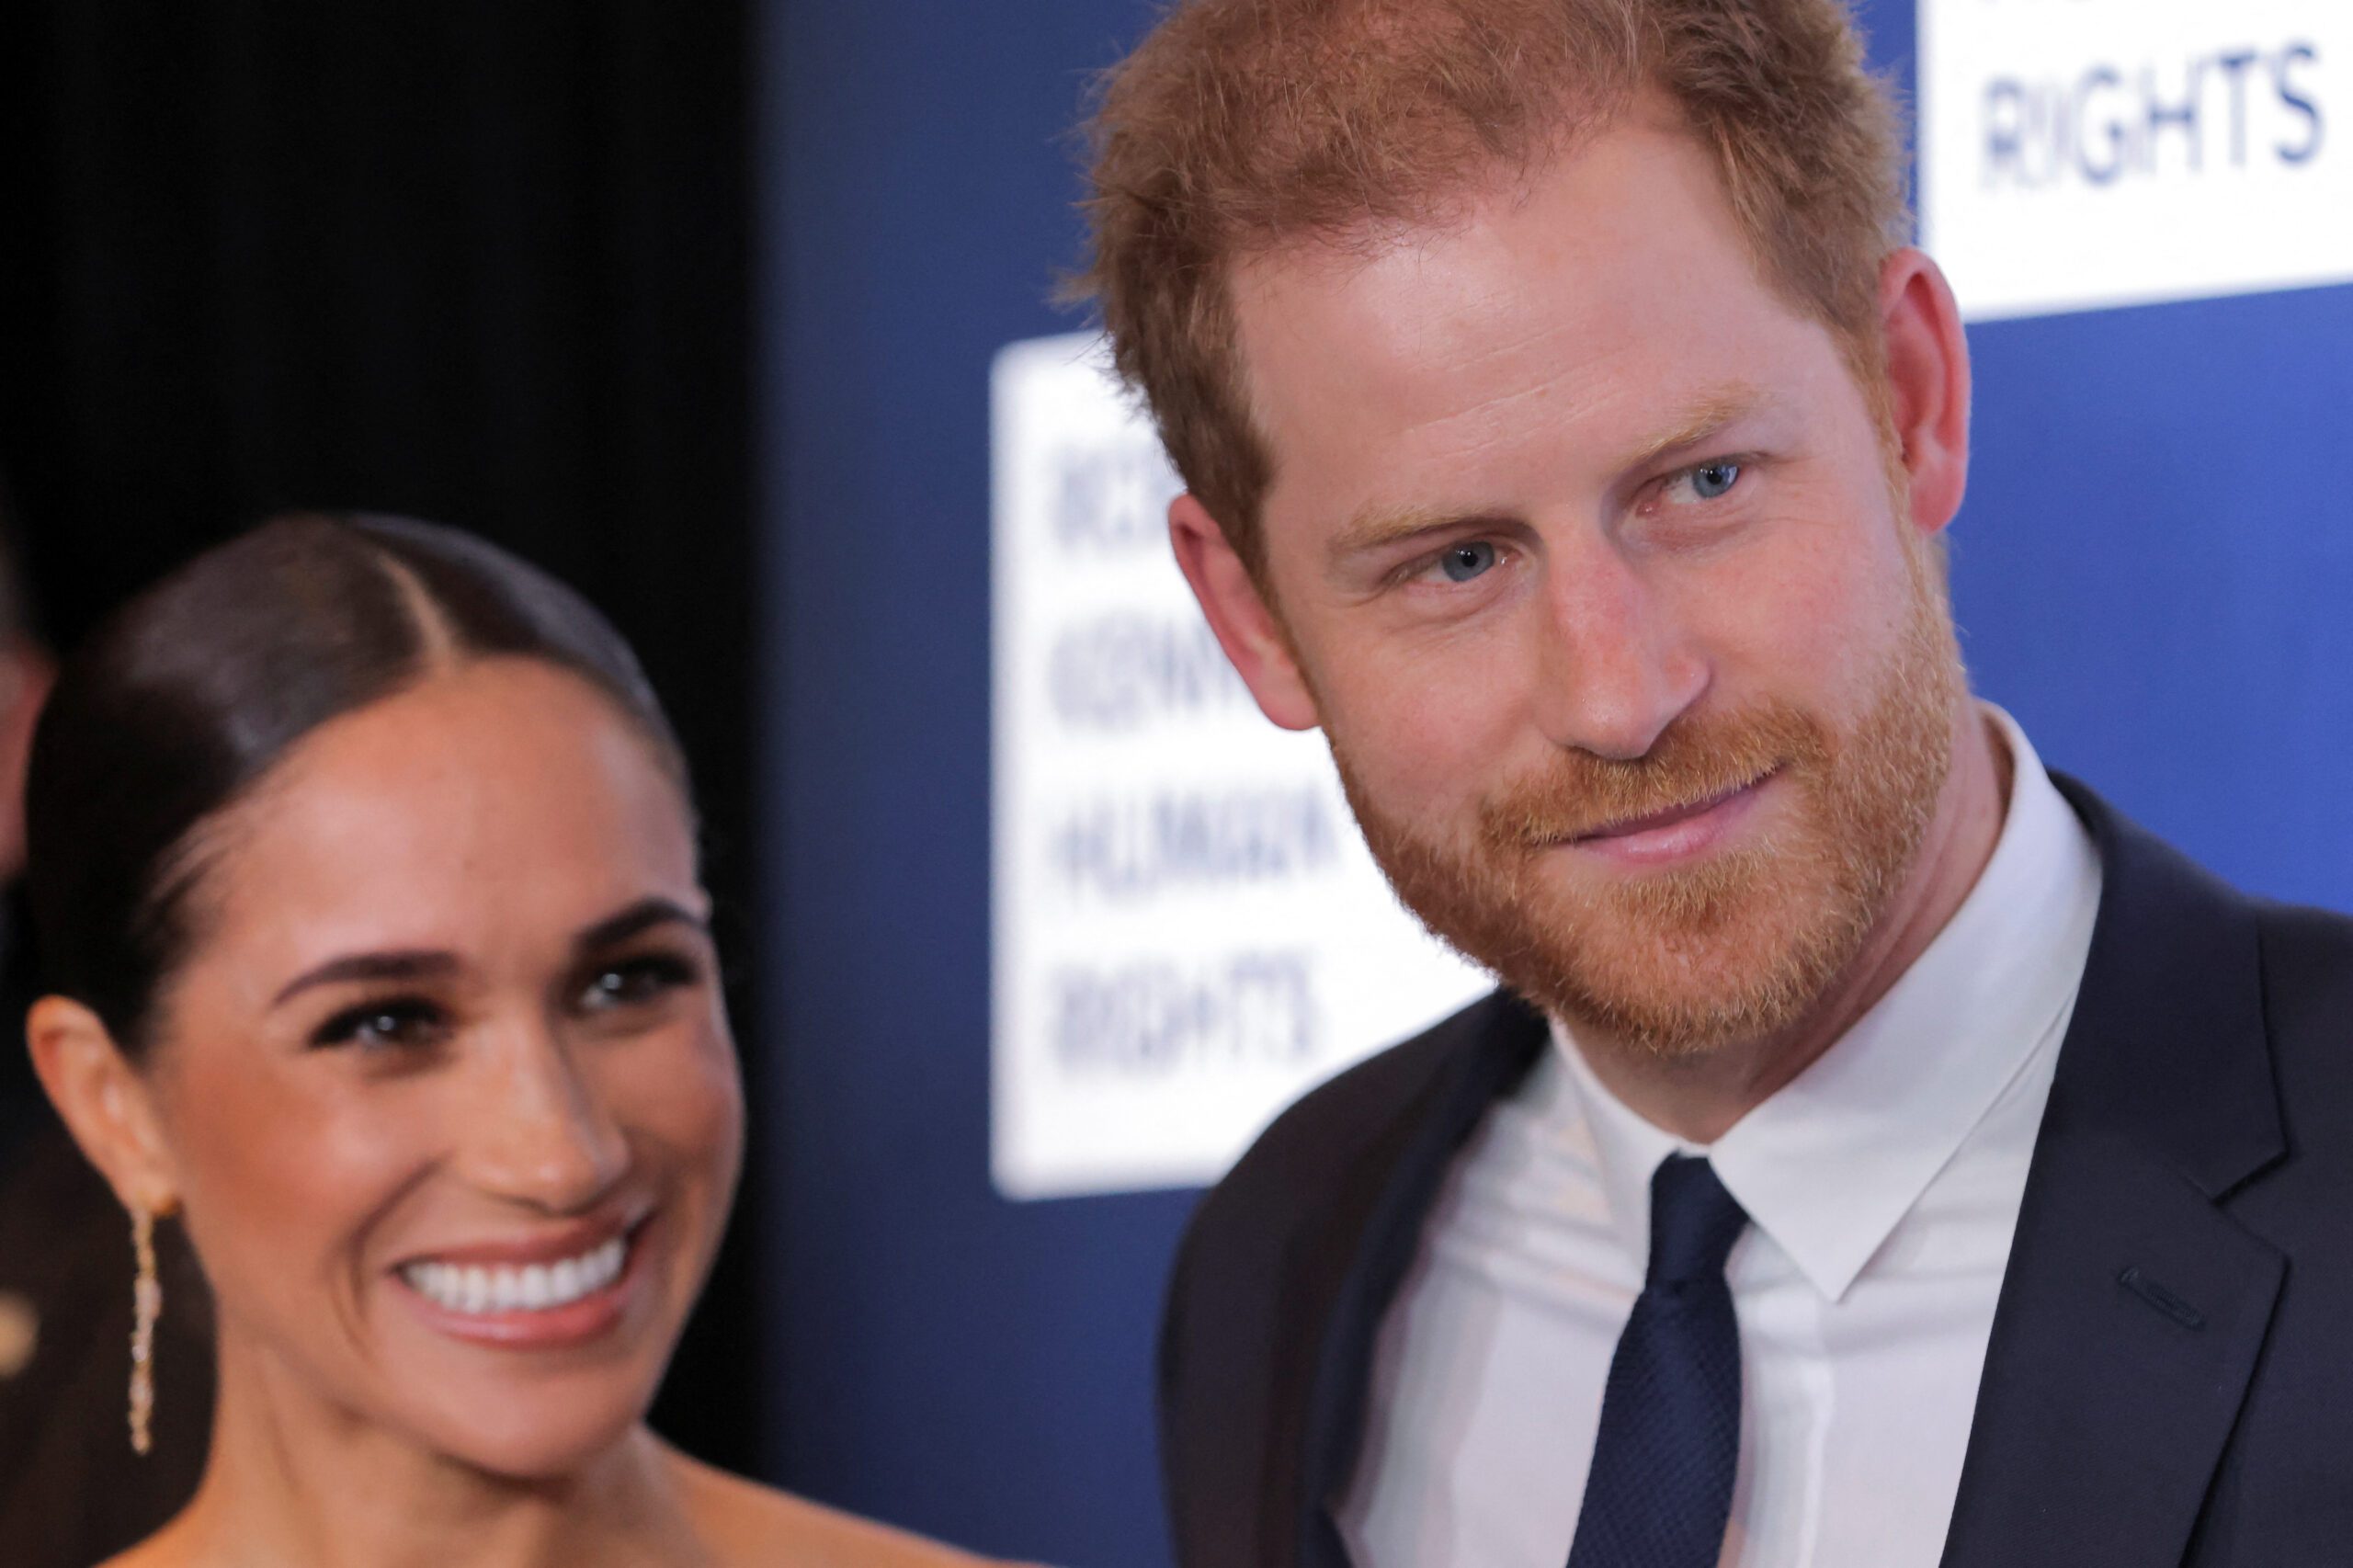 'Gossip behind the scenes': Reactions to Harry and Meghan's Netflix documentary